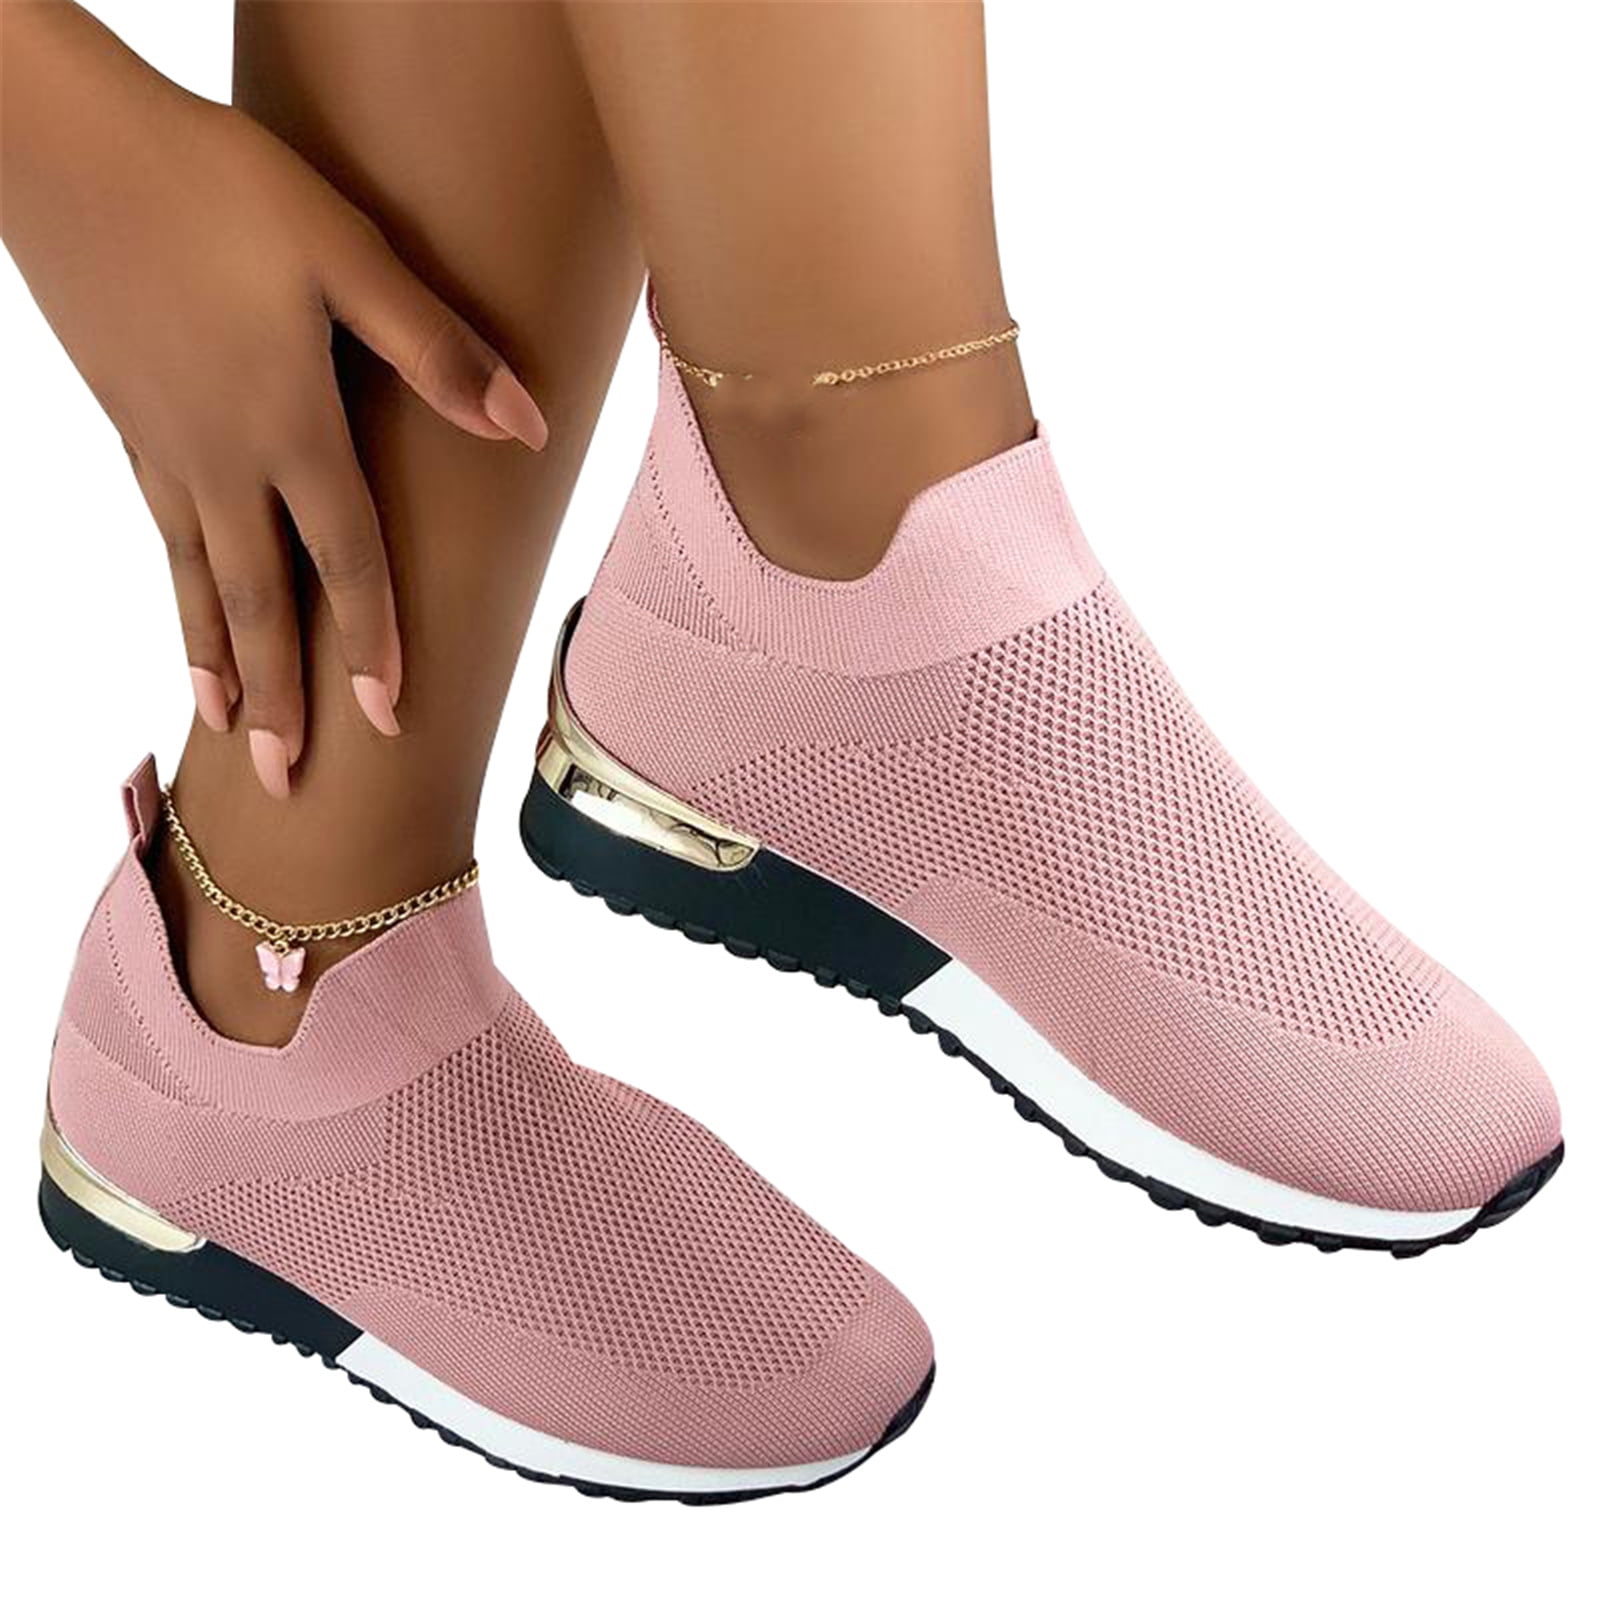 Athletic Walking Shoes Casual Mesh-Comfortable Work Sneakers Elegant Elastic Slip-on Flat Shoes Women's Sneakers Elastic Slip on Flat Walking Shoes with Arch Support 